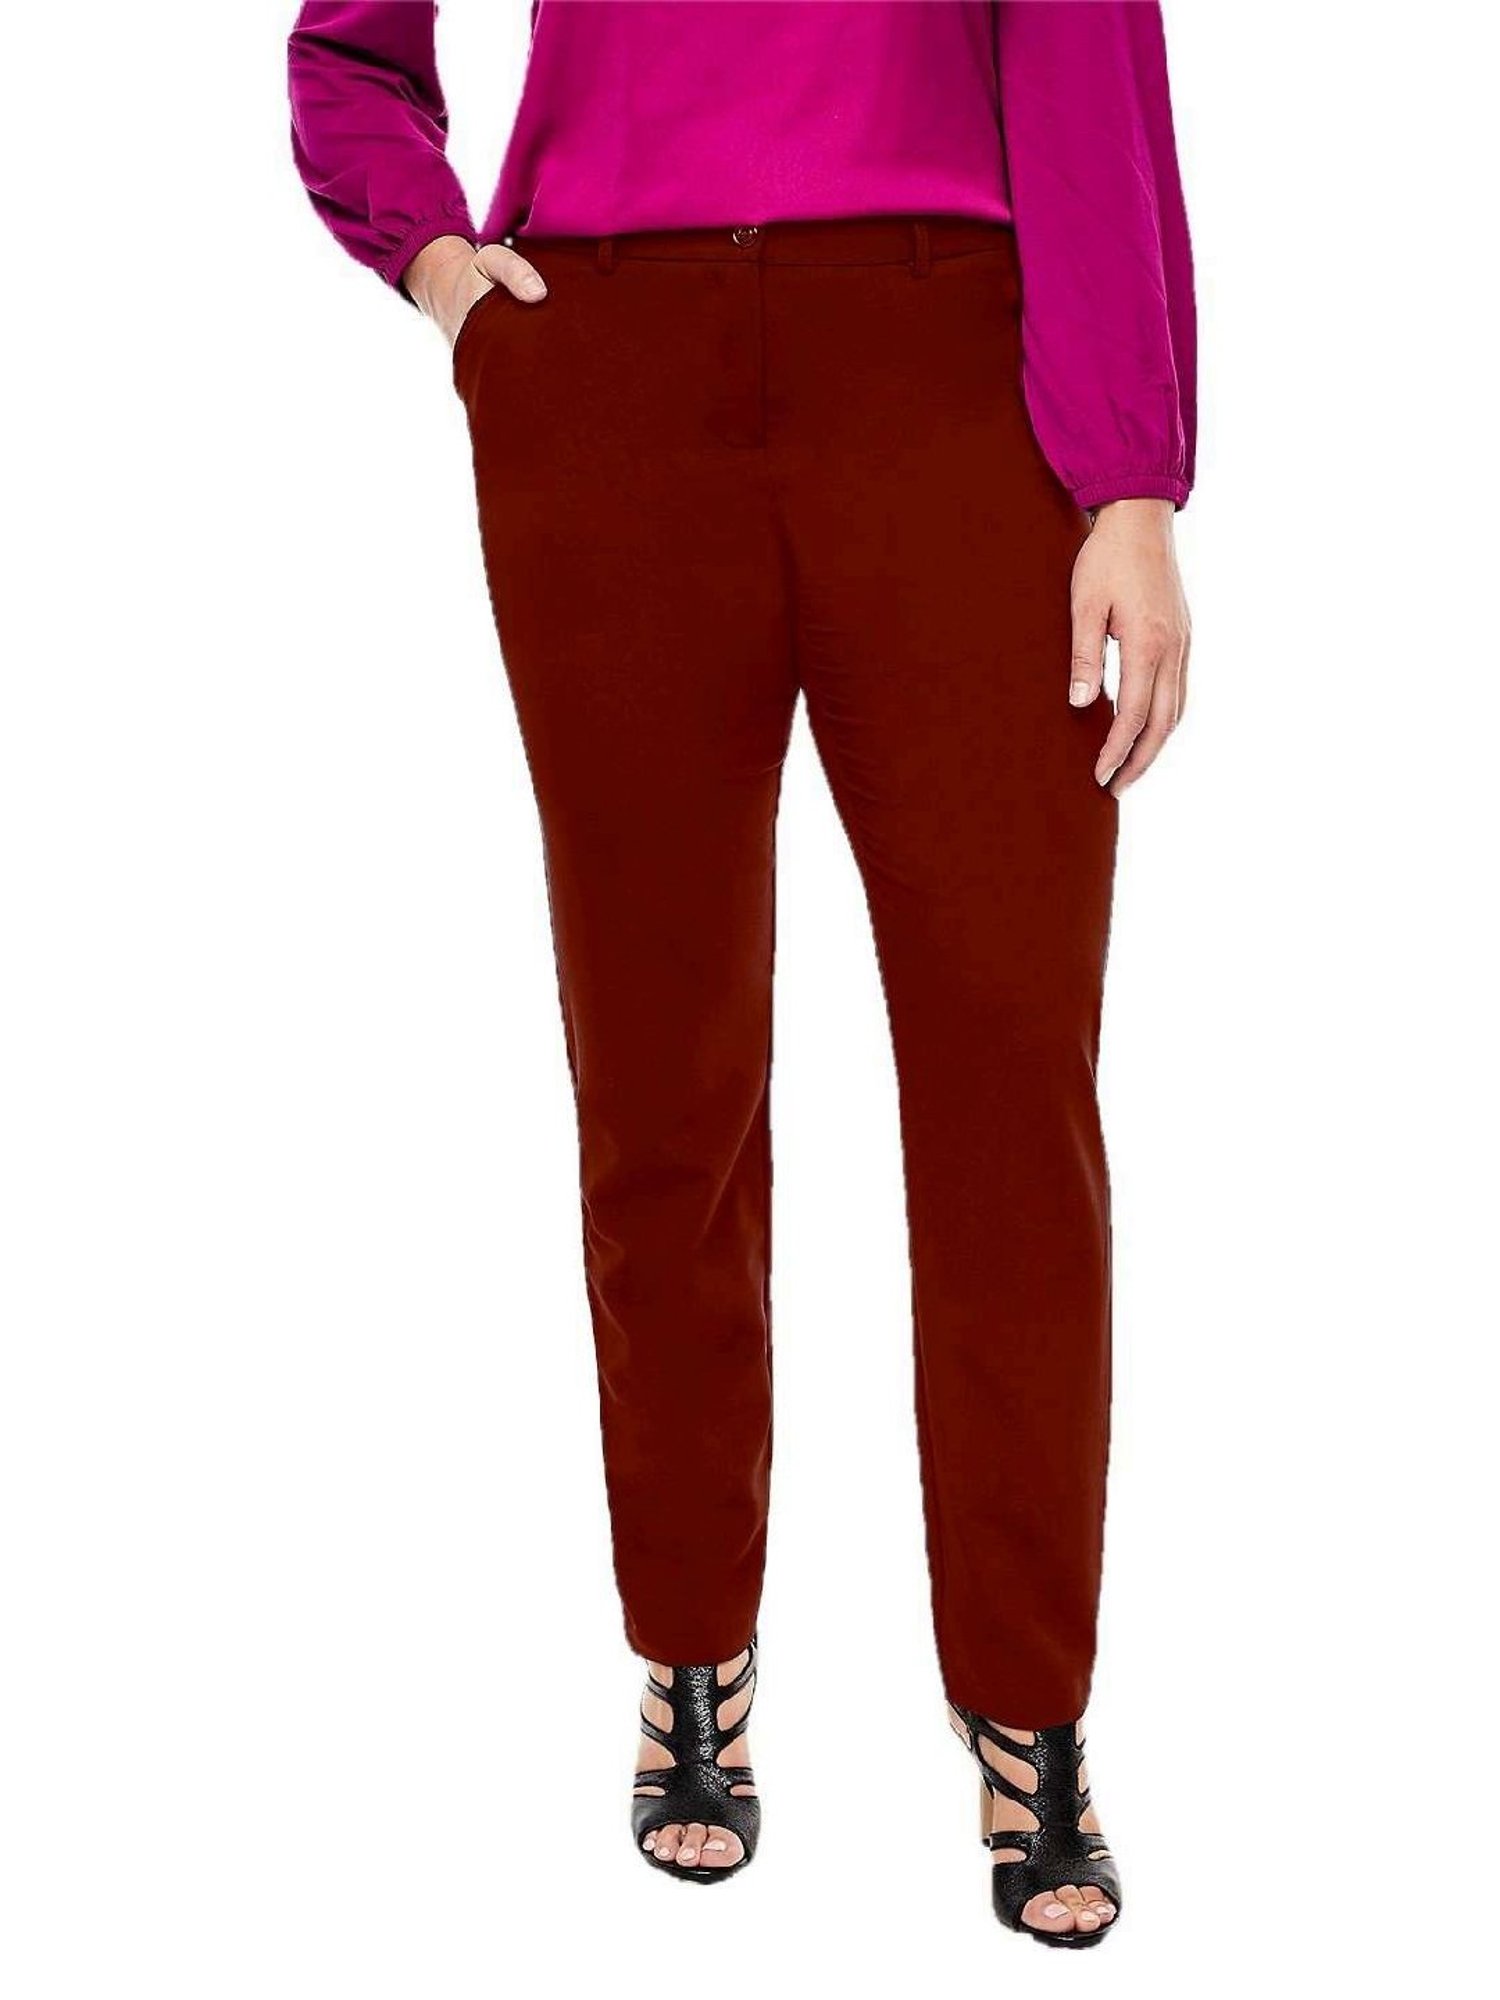 Buy PATRORNA Womens Slim Fit Carrot Trousers PT8A69MaroonXS at Amazonin